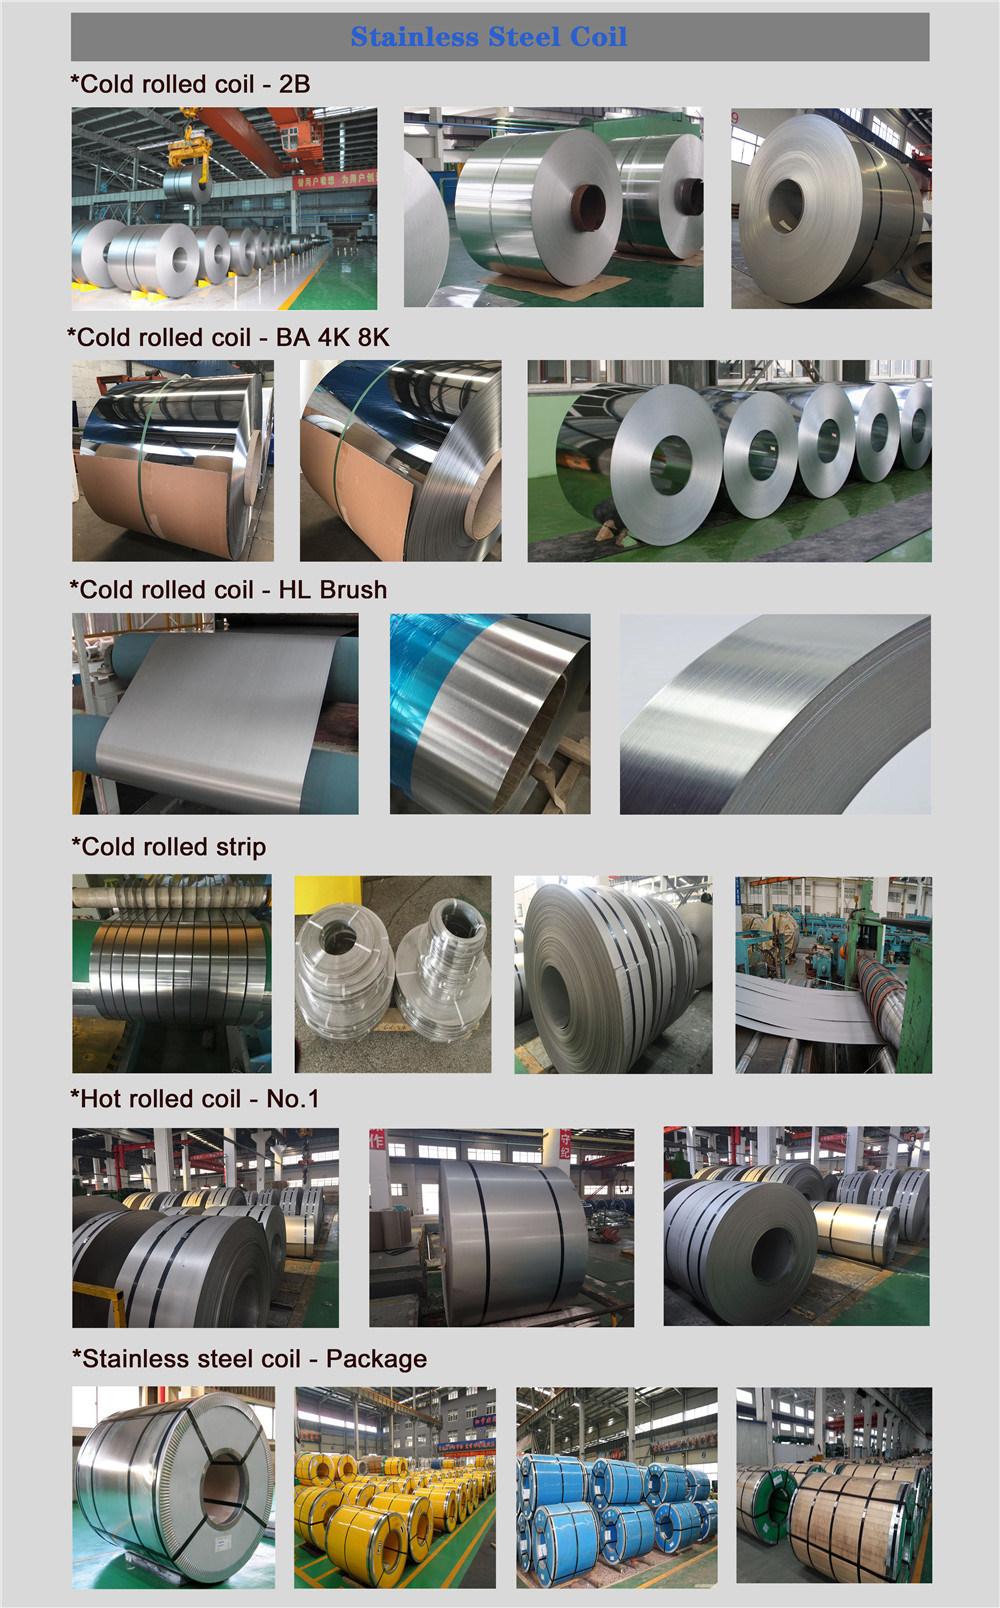 China Wholesale Free Sample AISI Cold Rolled 2b Inox Steel Coil 201 304 304L 310S 316L 430 2205 904L Stainless Steel Coil Strip Price